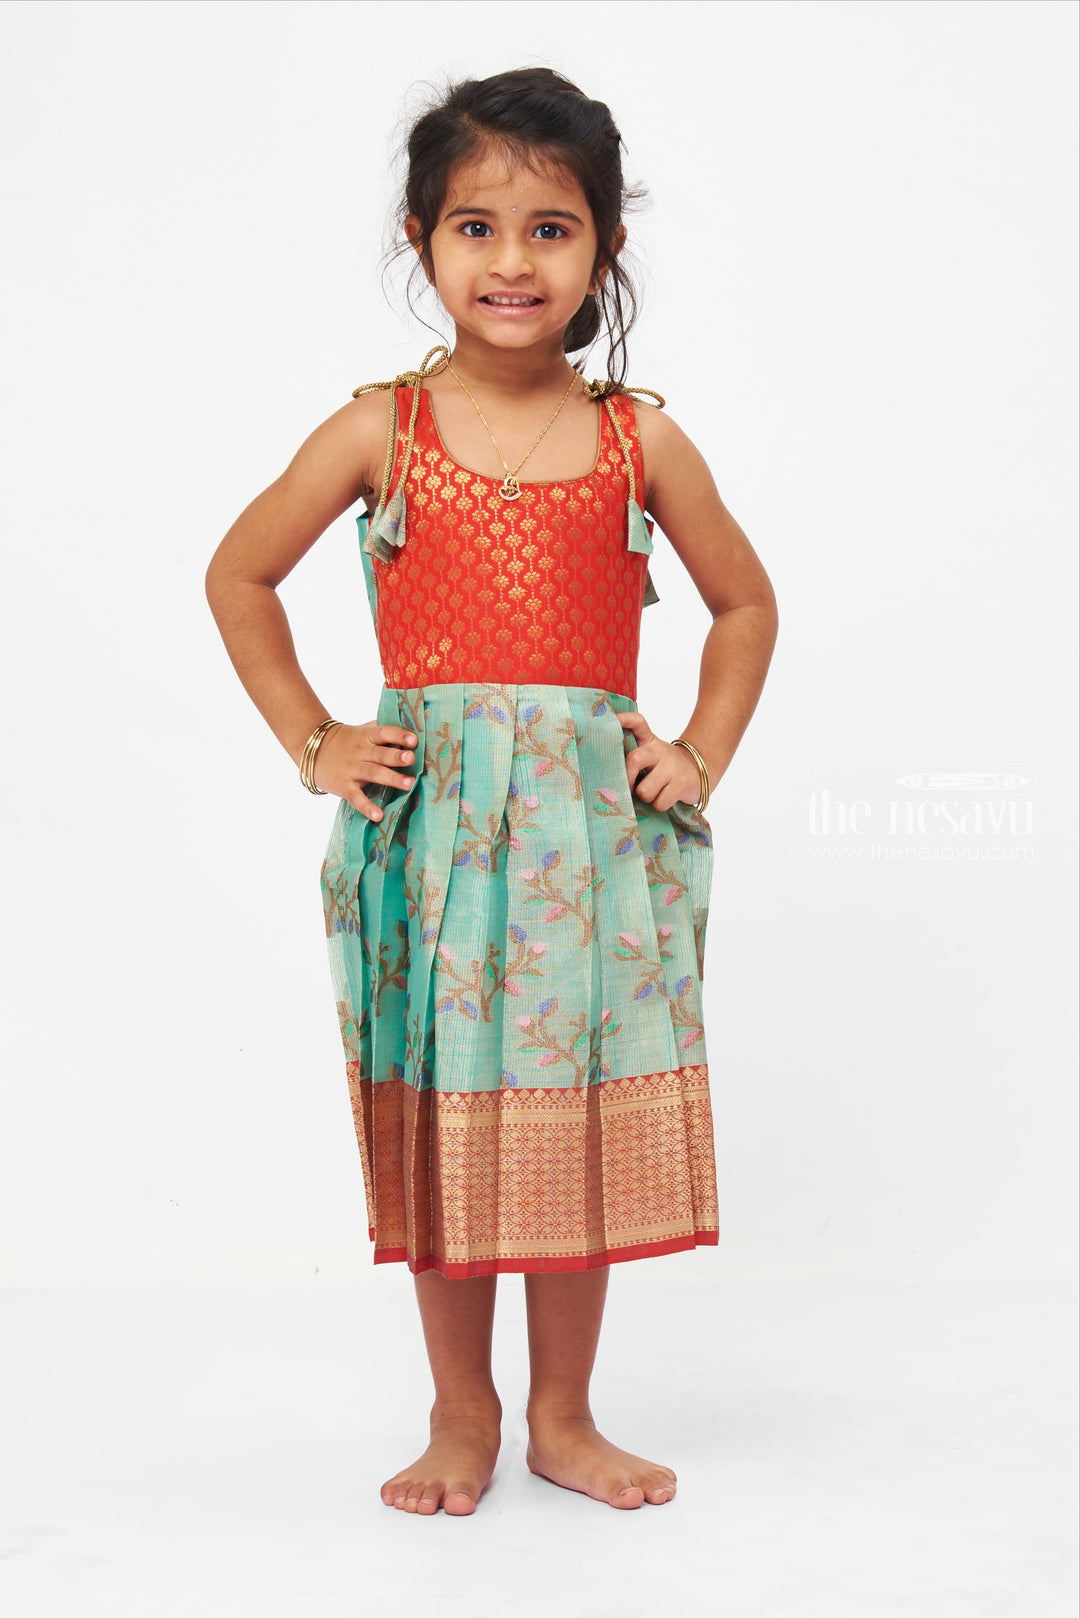 The Nesavu Tie-up Frock Red Yoke And Floral Printed Brocade Designer Tie-Up Frocks For Little Girls Nesavu 16 (1Y) / Red T265C-16 Semi-Silk Tie-up Frocks For Girls| Pongal Collection| The Nesavu